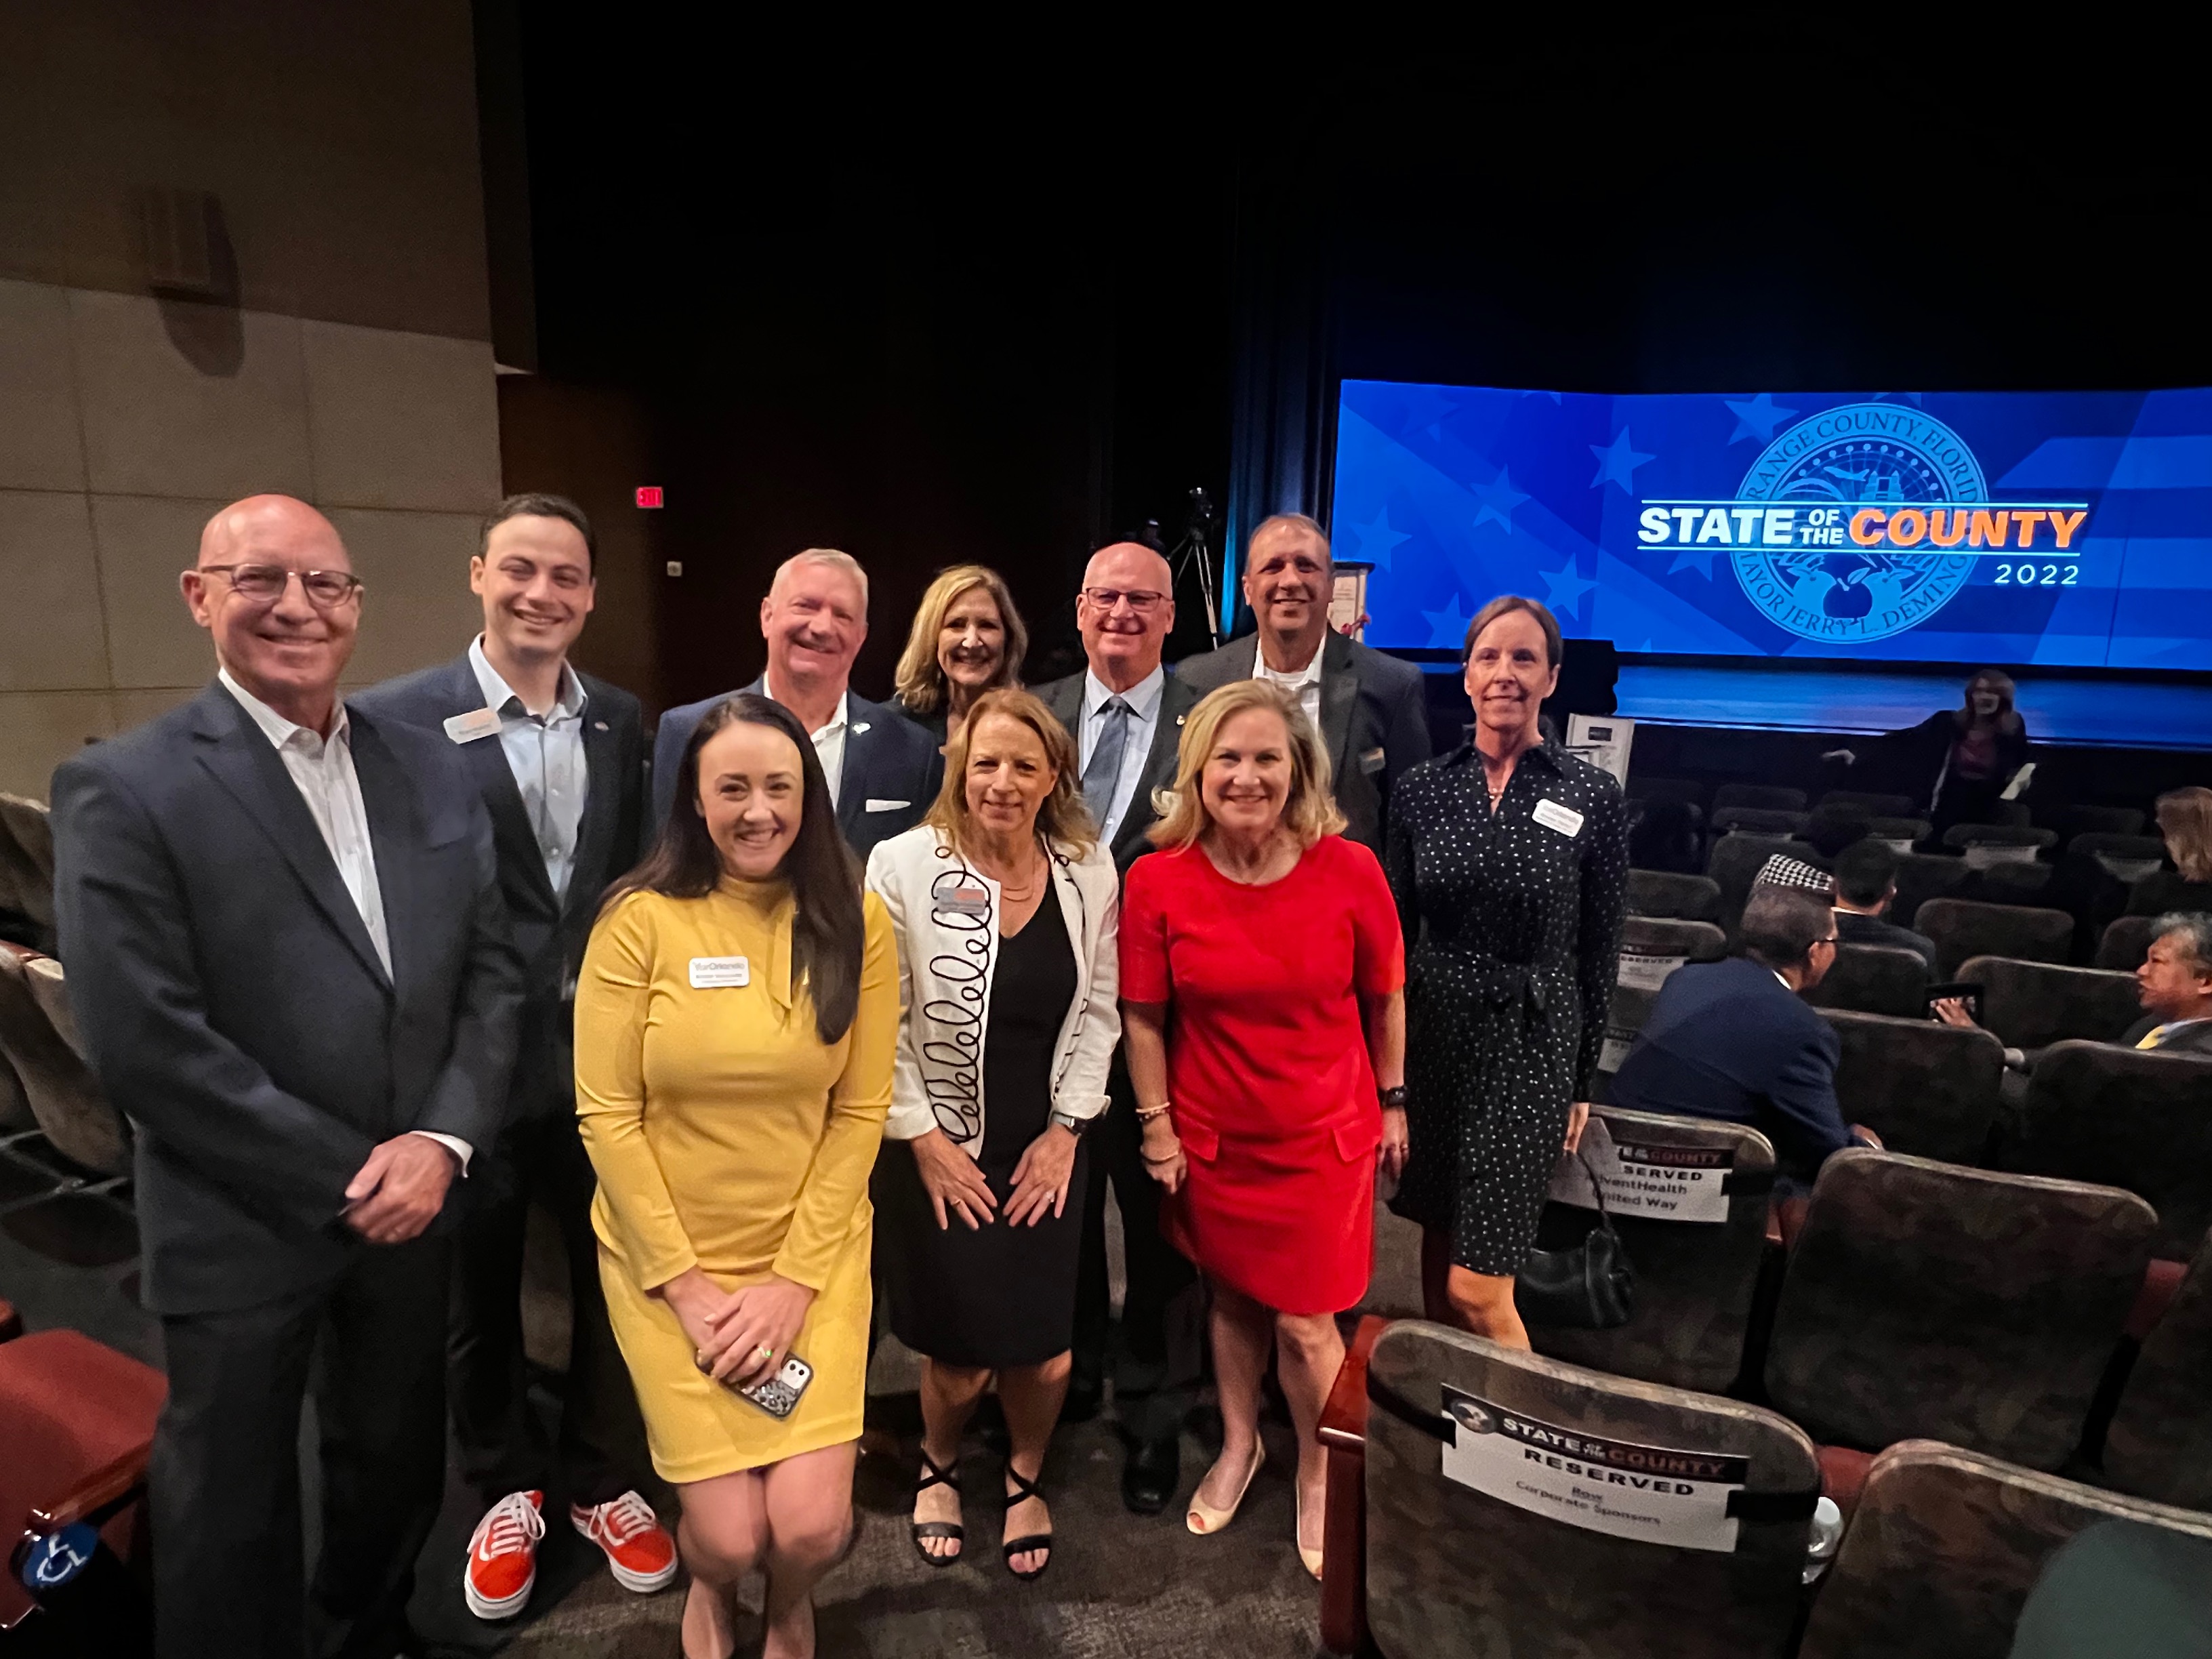 Visit Orlando team members pictured at OCCC during Mayor Demings’ 2022 State of the County address.